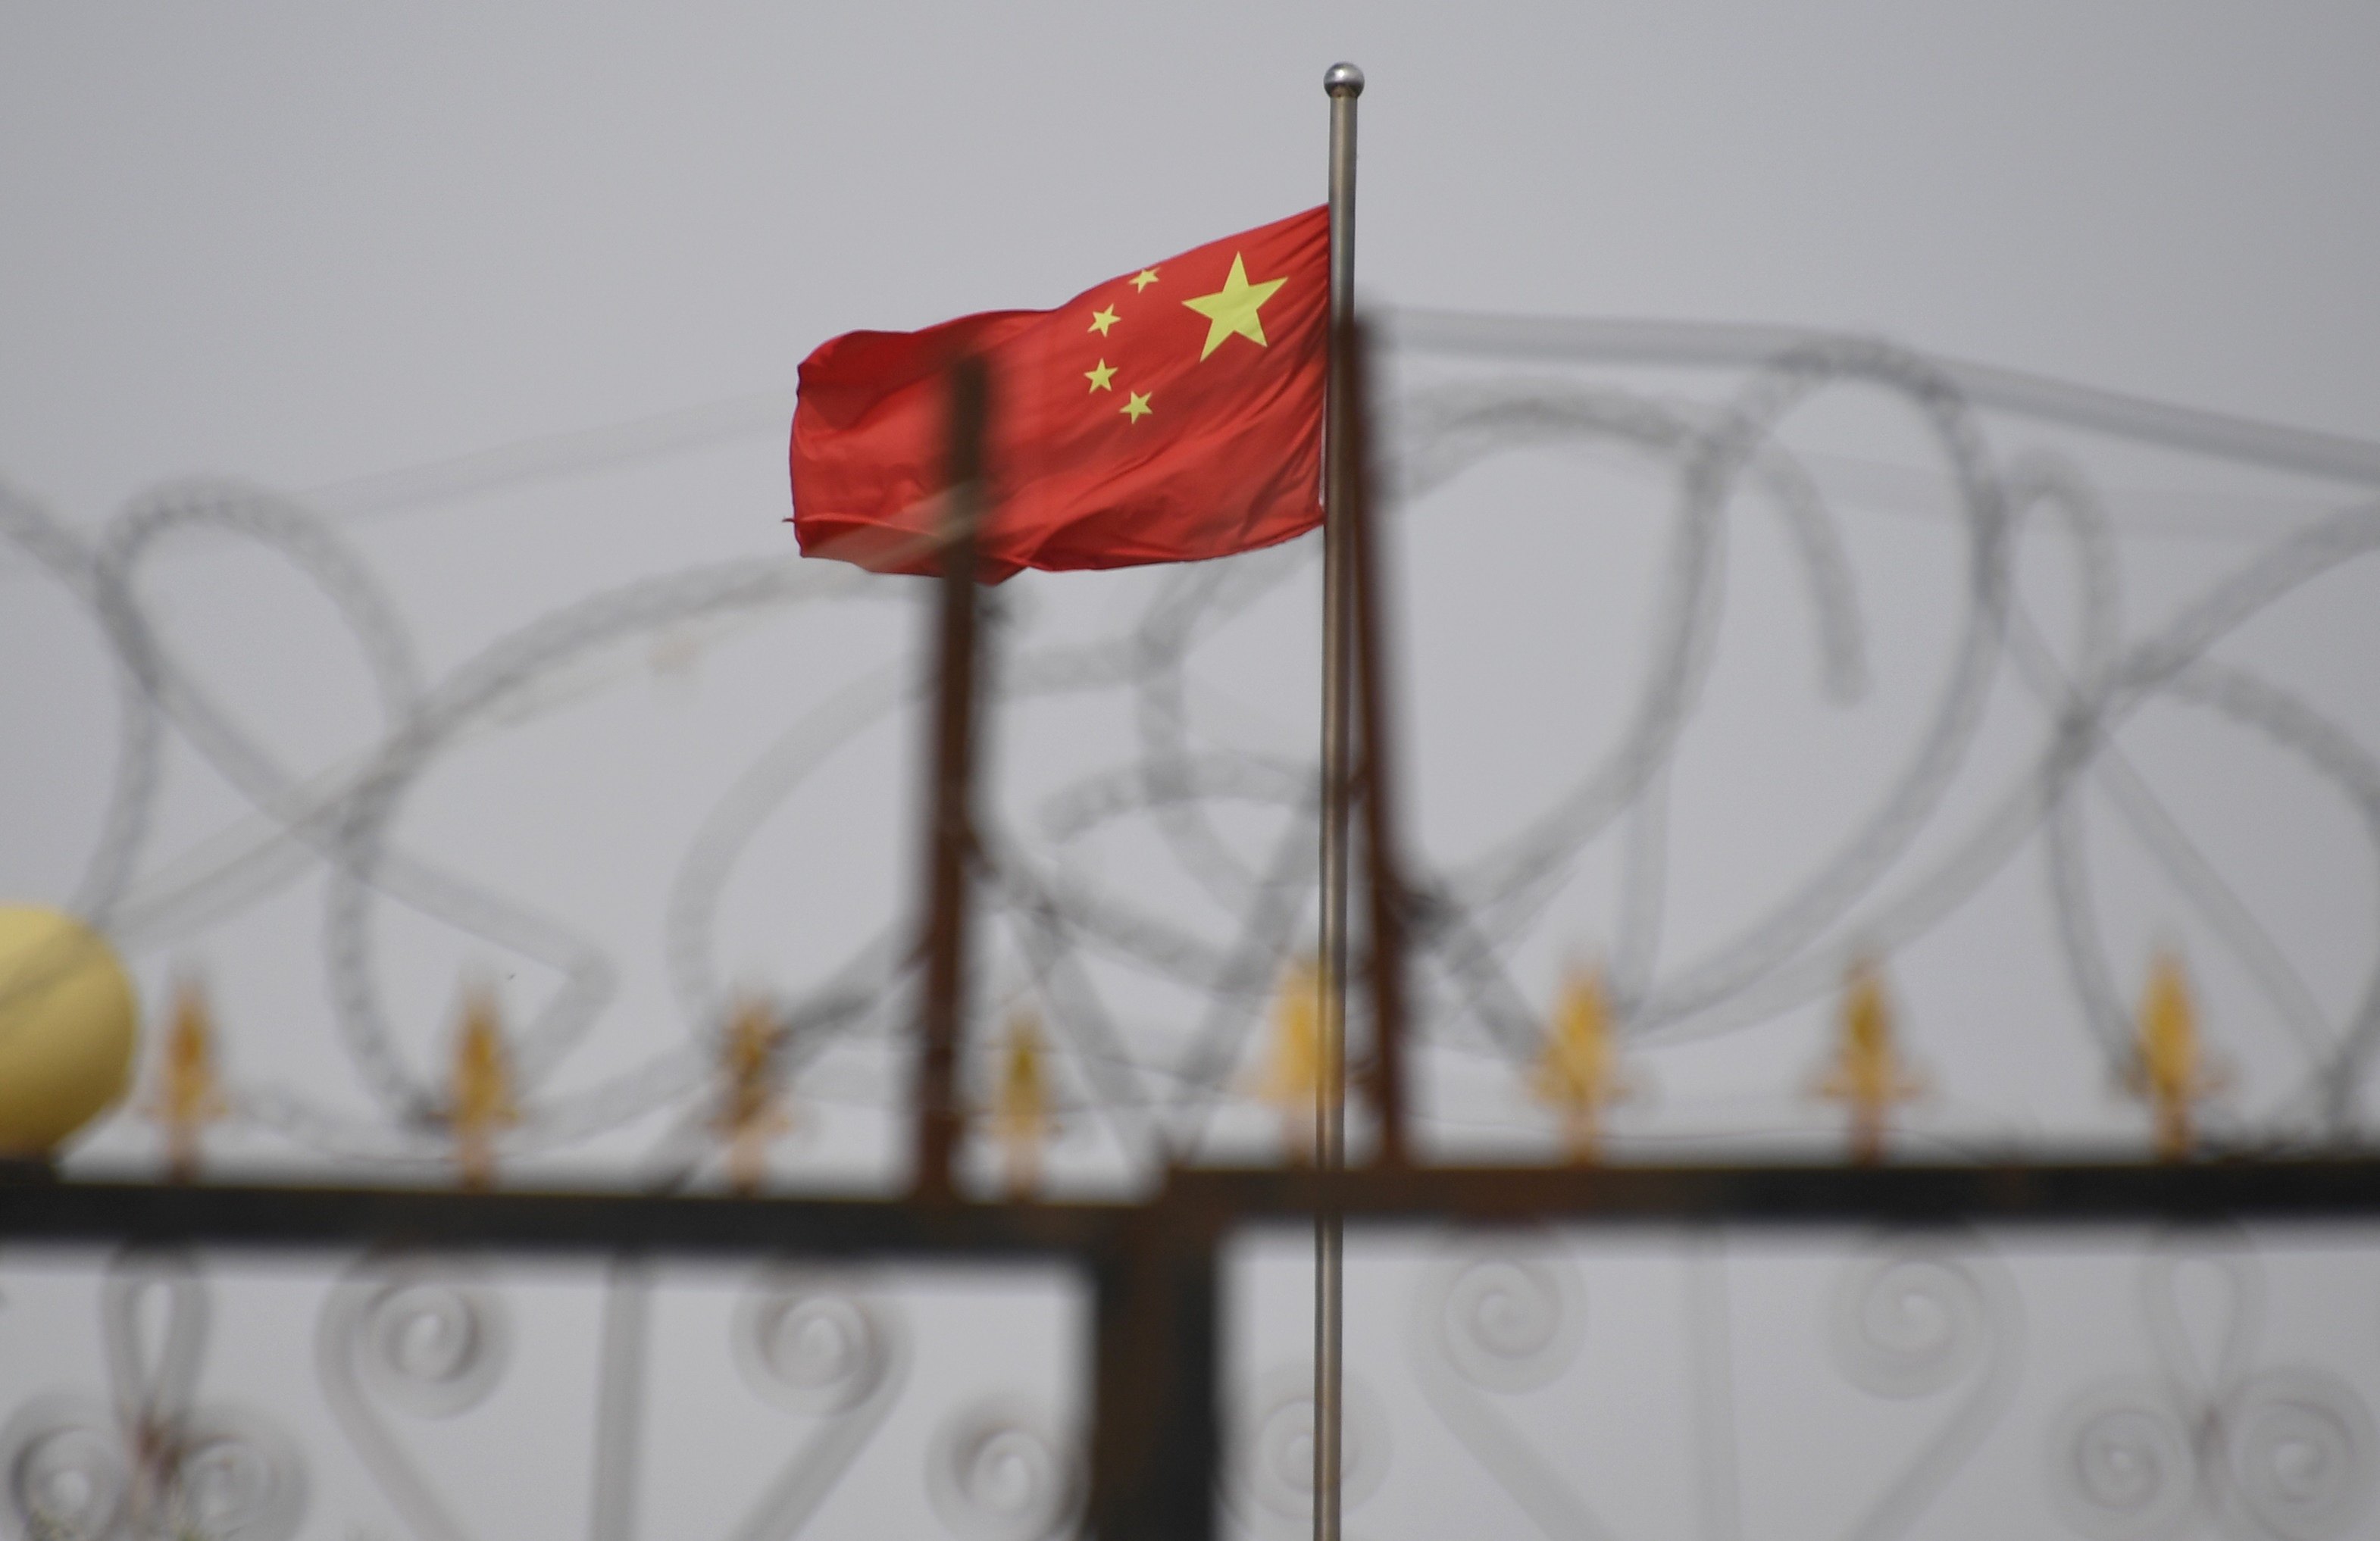 China has been accused of using mass detention camps in the region. Photo: AFP